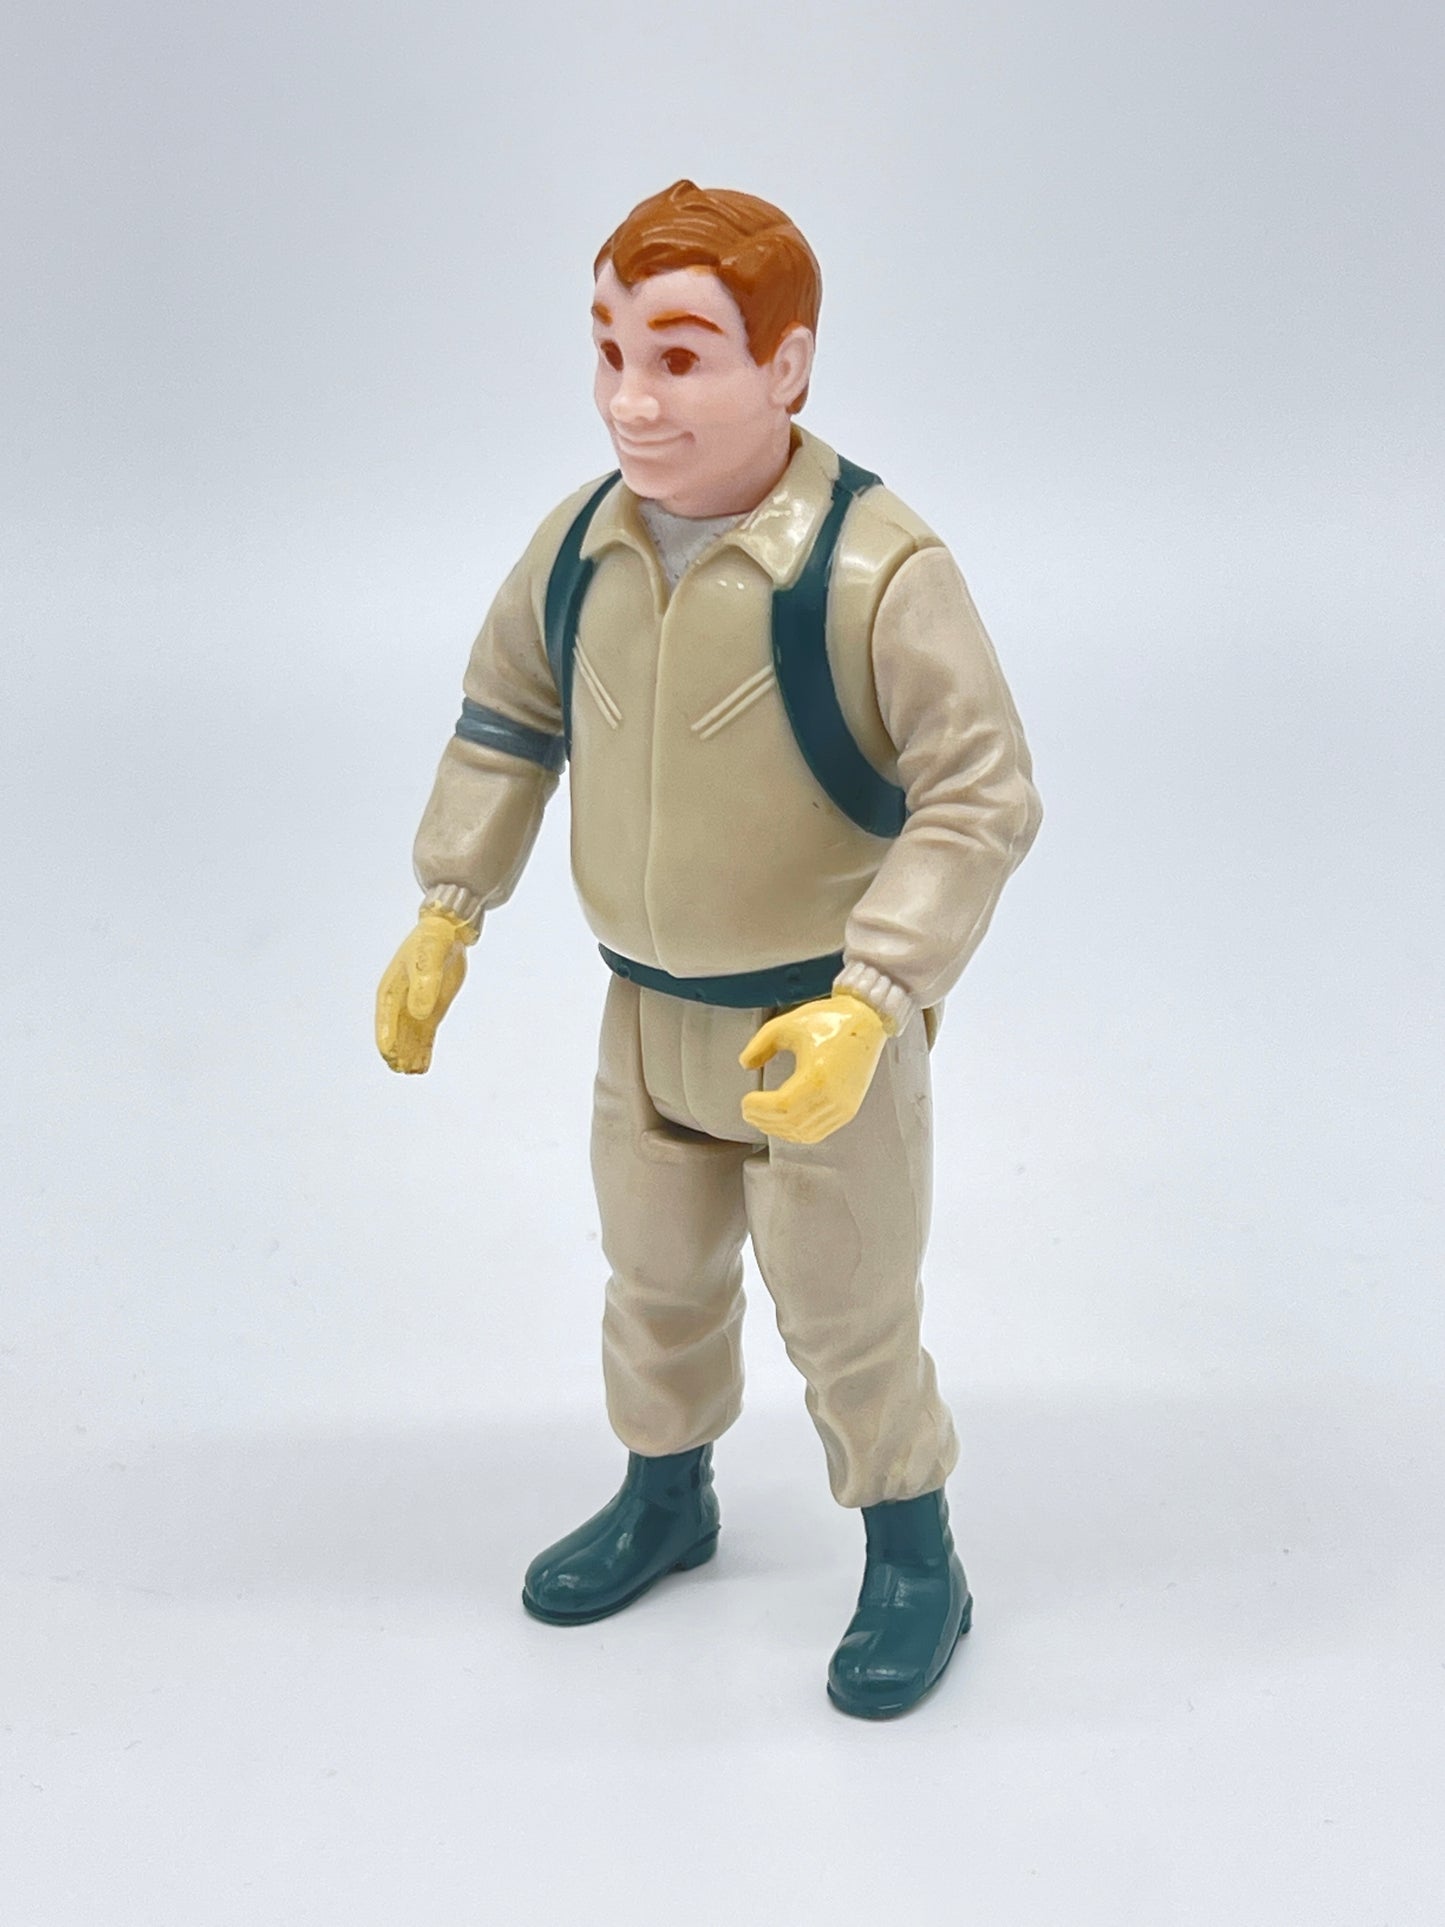 The Real Ghostbusters Ray Stantz (lose) Vintage Columbia Pictures (1984)